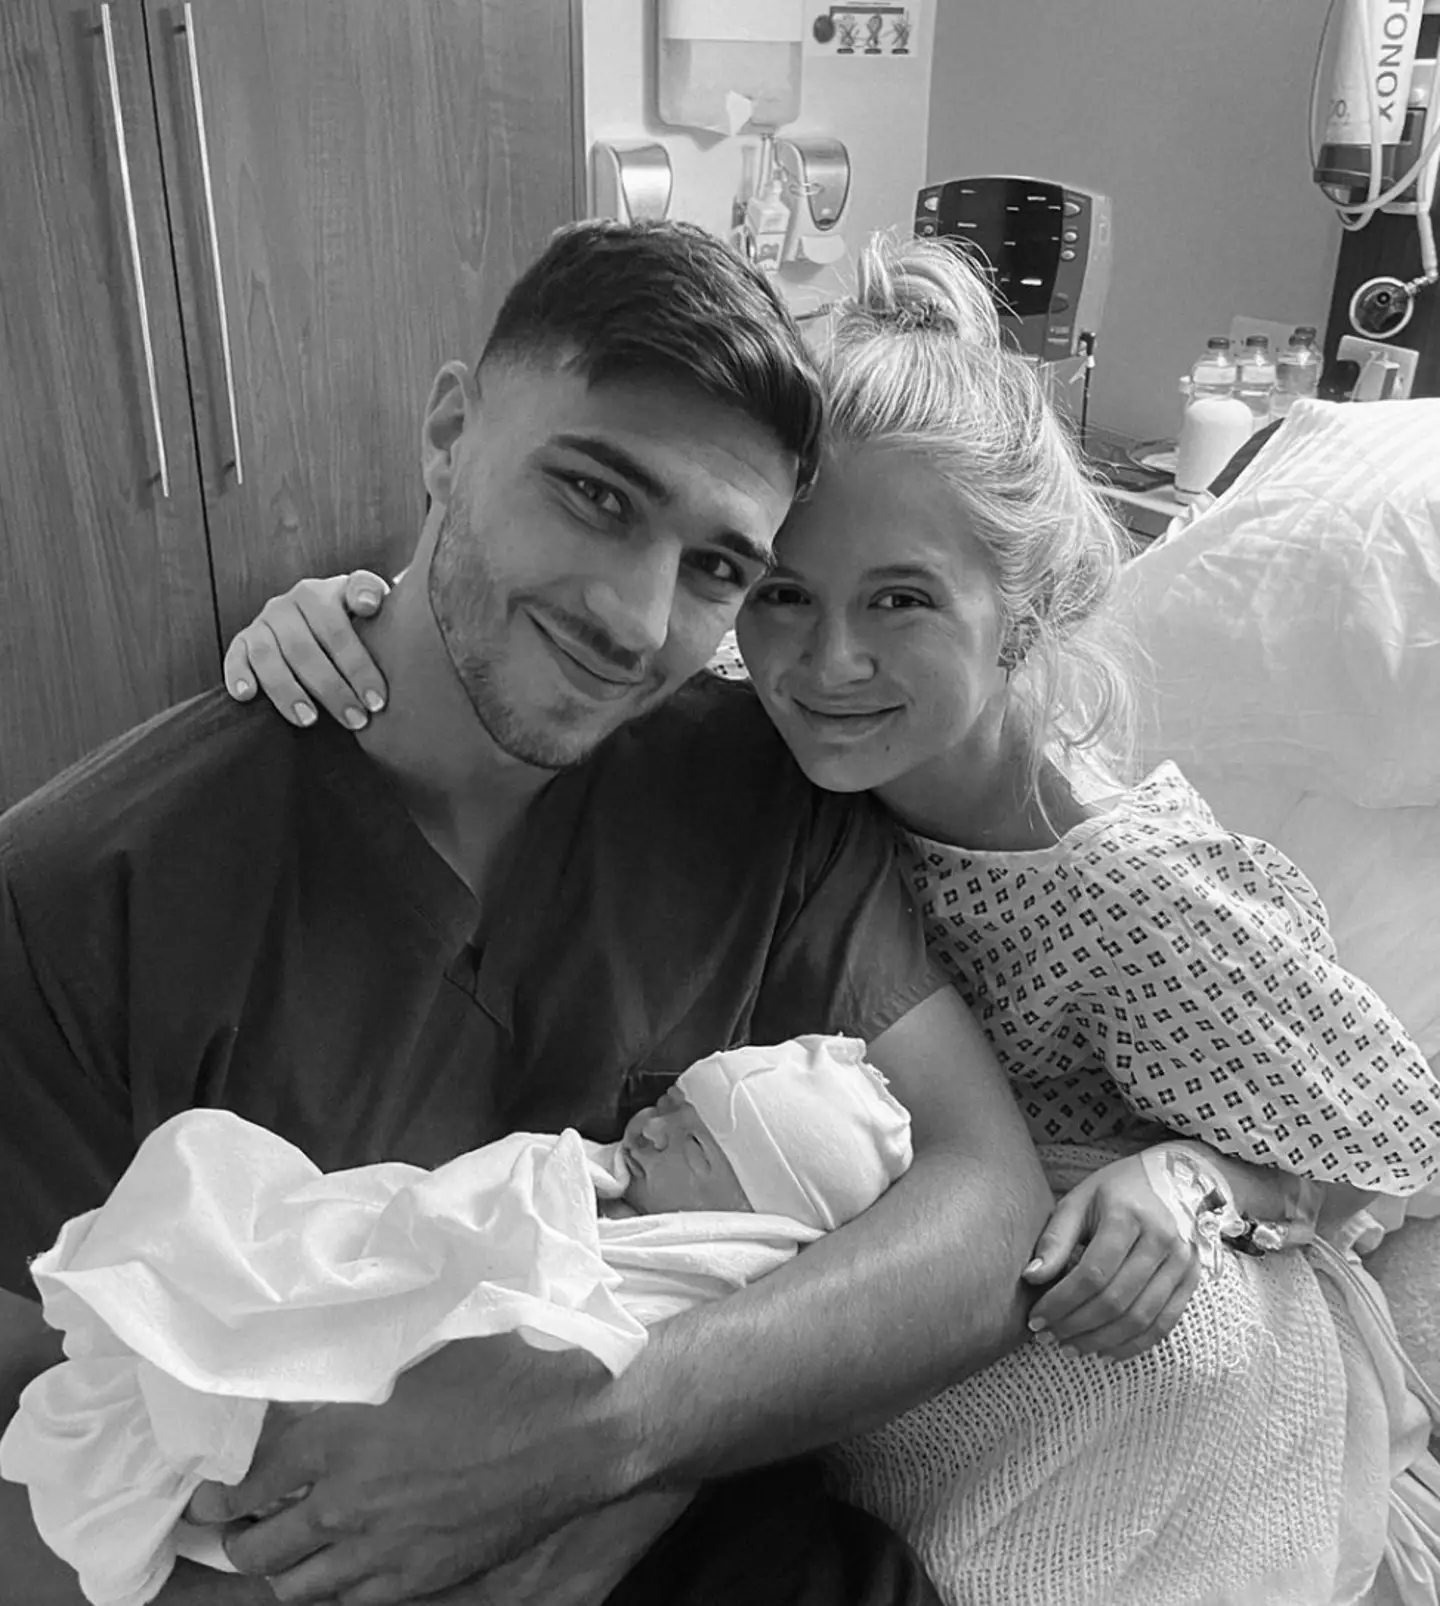 Molly-Mae Hague & Tommy Fury welcomed their first child last month.